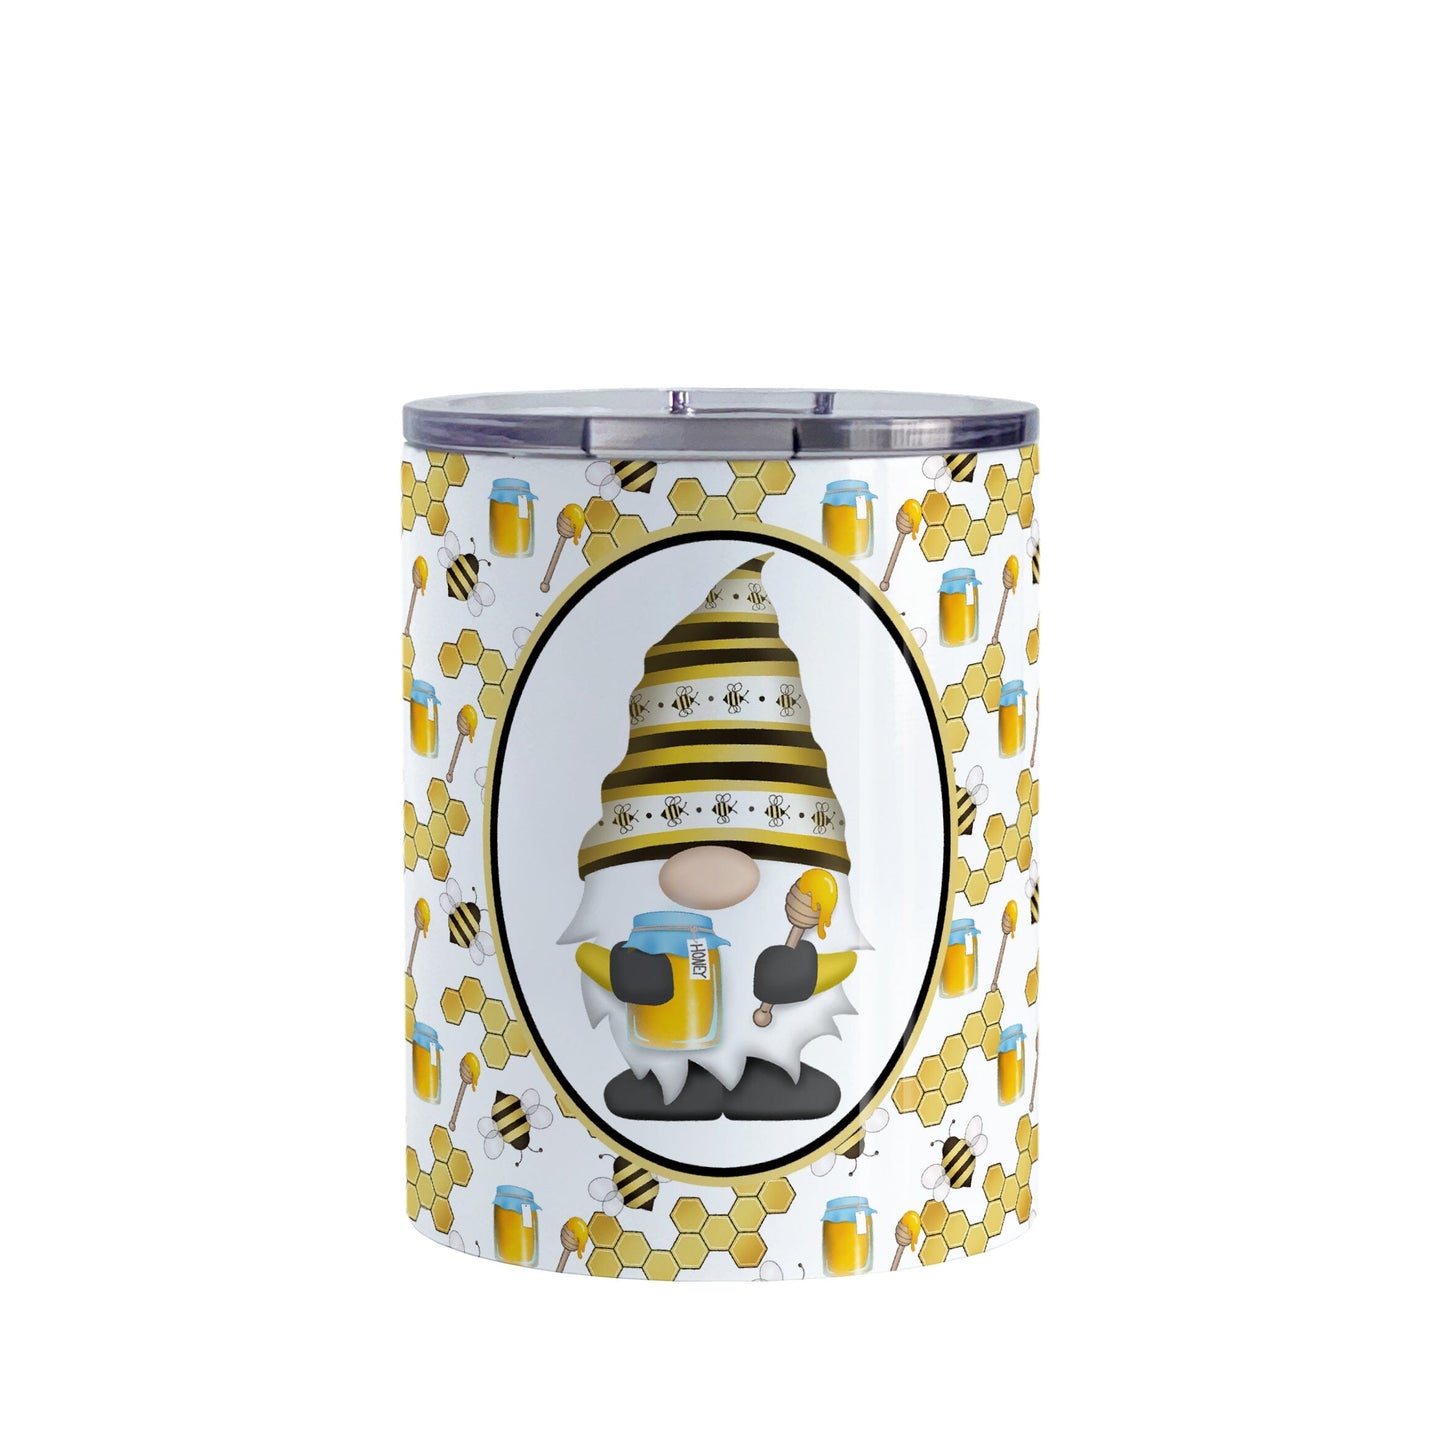 Yellow Gnome Honey Jar Bee Tumbler Cup (10oz) at Amy's Coffee Mugs. A stainless steel tumbler cup designed with an adorable gnome wearing a yellow bee-themed hat and holding a honey jar and honey dipper in a white oval over a pattern background that wraps around the cup with bees, honey jars, honey dippers, and honeycomb.